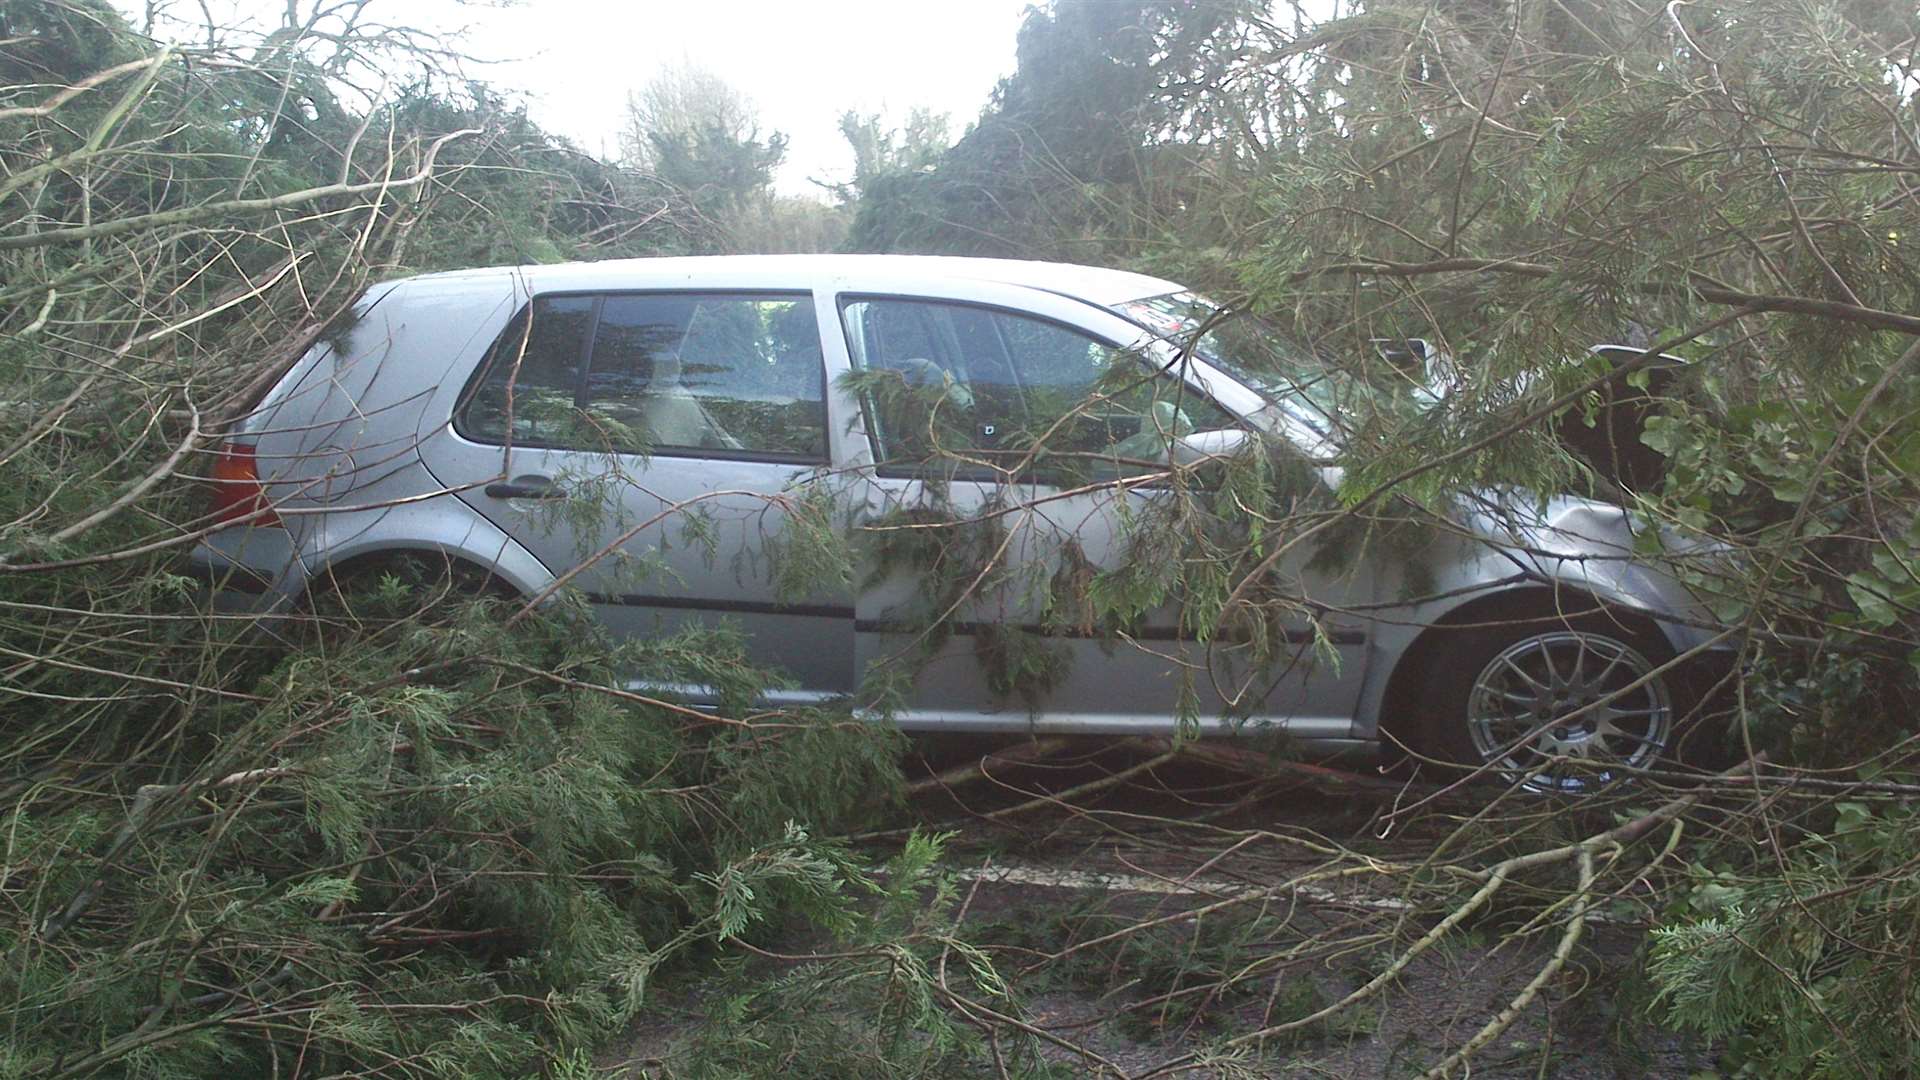 Driver Robert Harden's car was hit by two falling trees